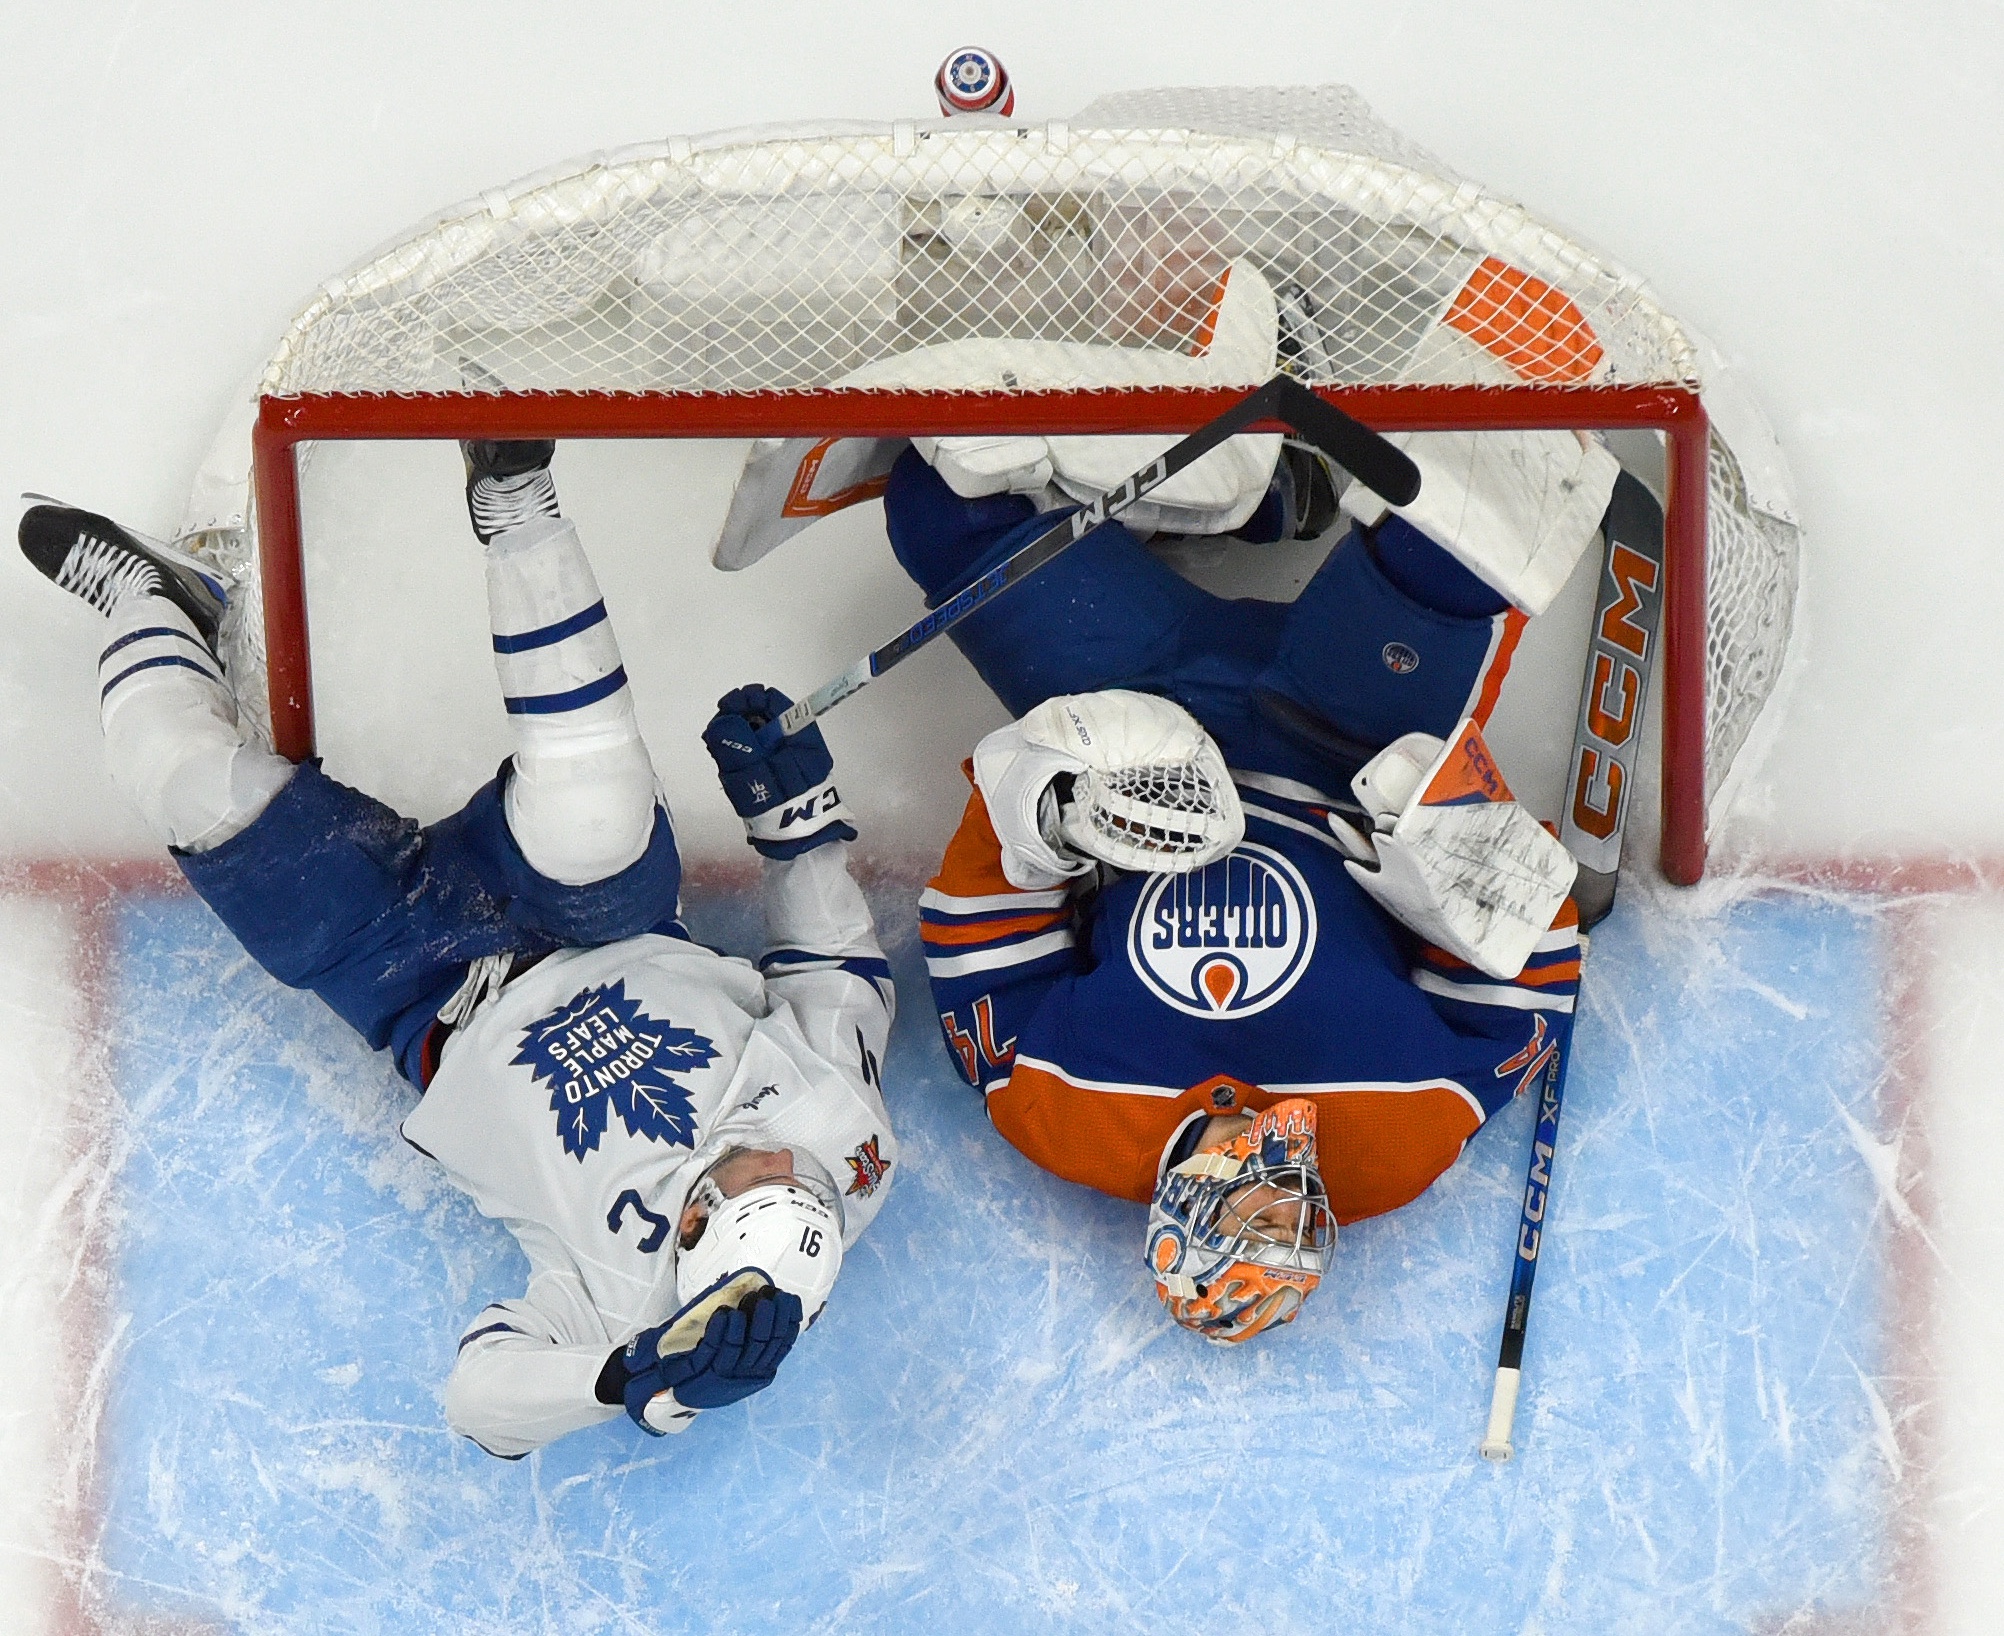 EDMONTON, CANADA - JANUARY 16: John Tavares #91 of the Toronto Maple Leafs collides with goaltender Stuart Skinner #74 of the Edmonton Oilers as they both lay in the net during the game at Rogers Place on January 16, 2024, in Edmonton, Alberta, Canada. (Photo by Andy Devlin/NHLI via Getty Images)